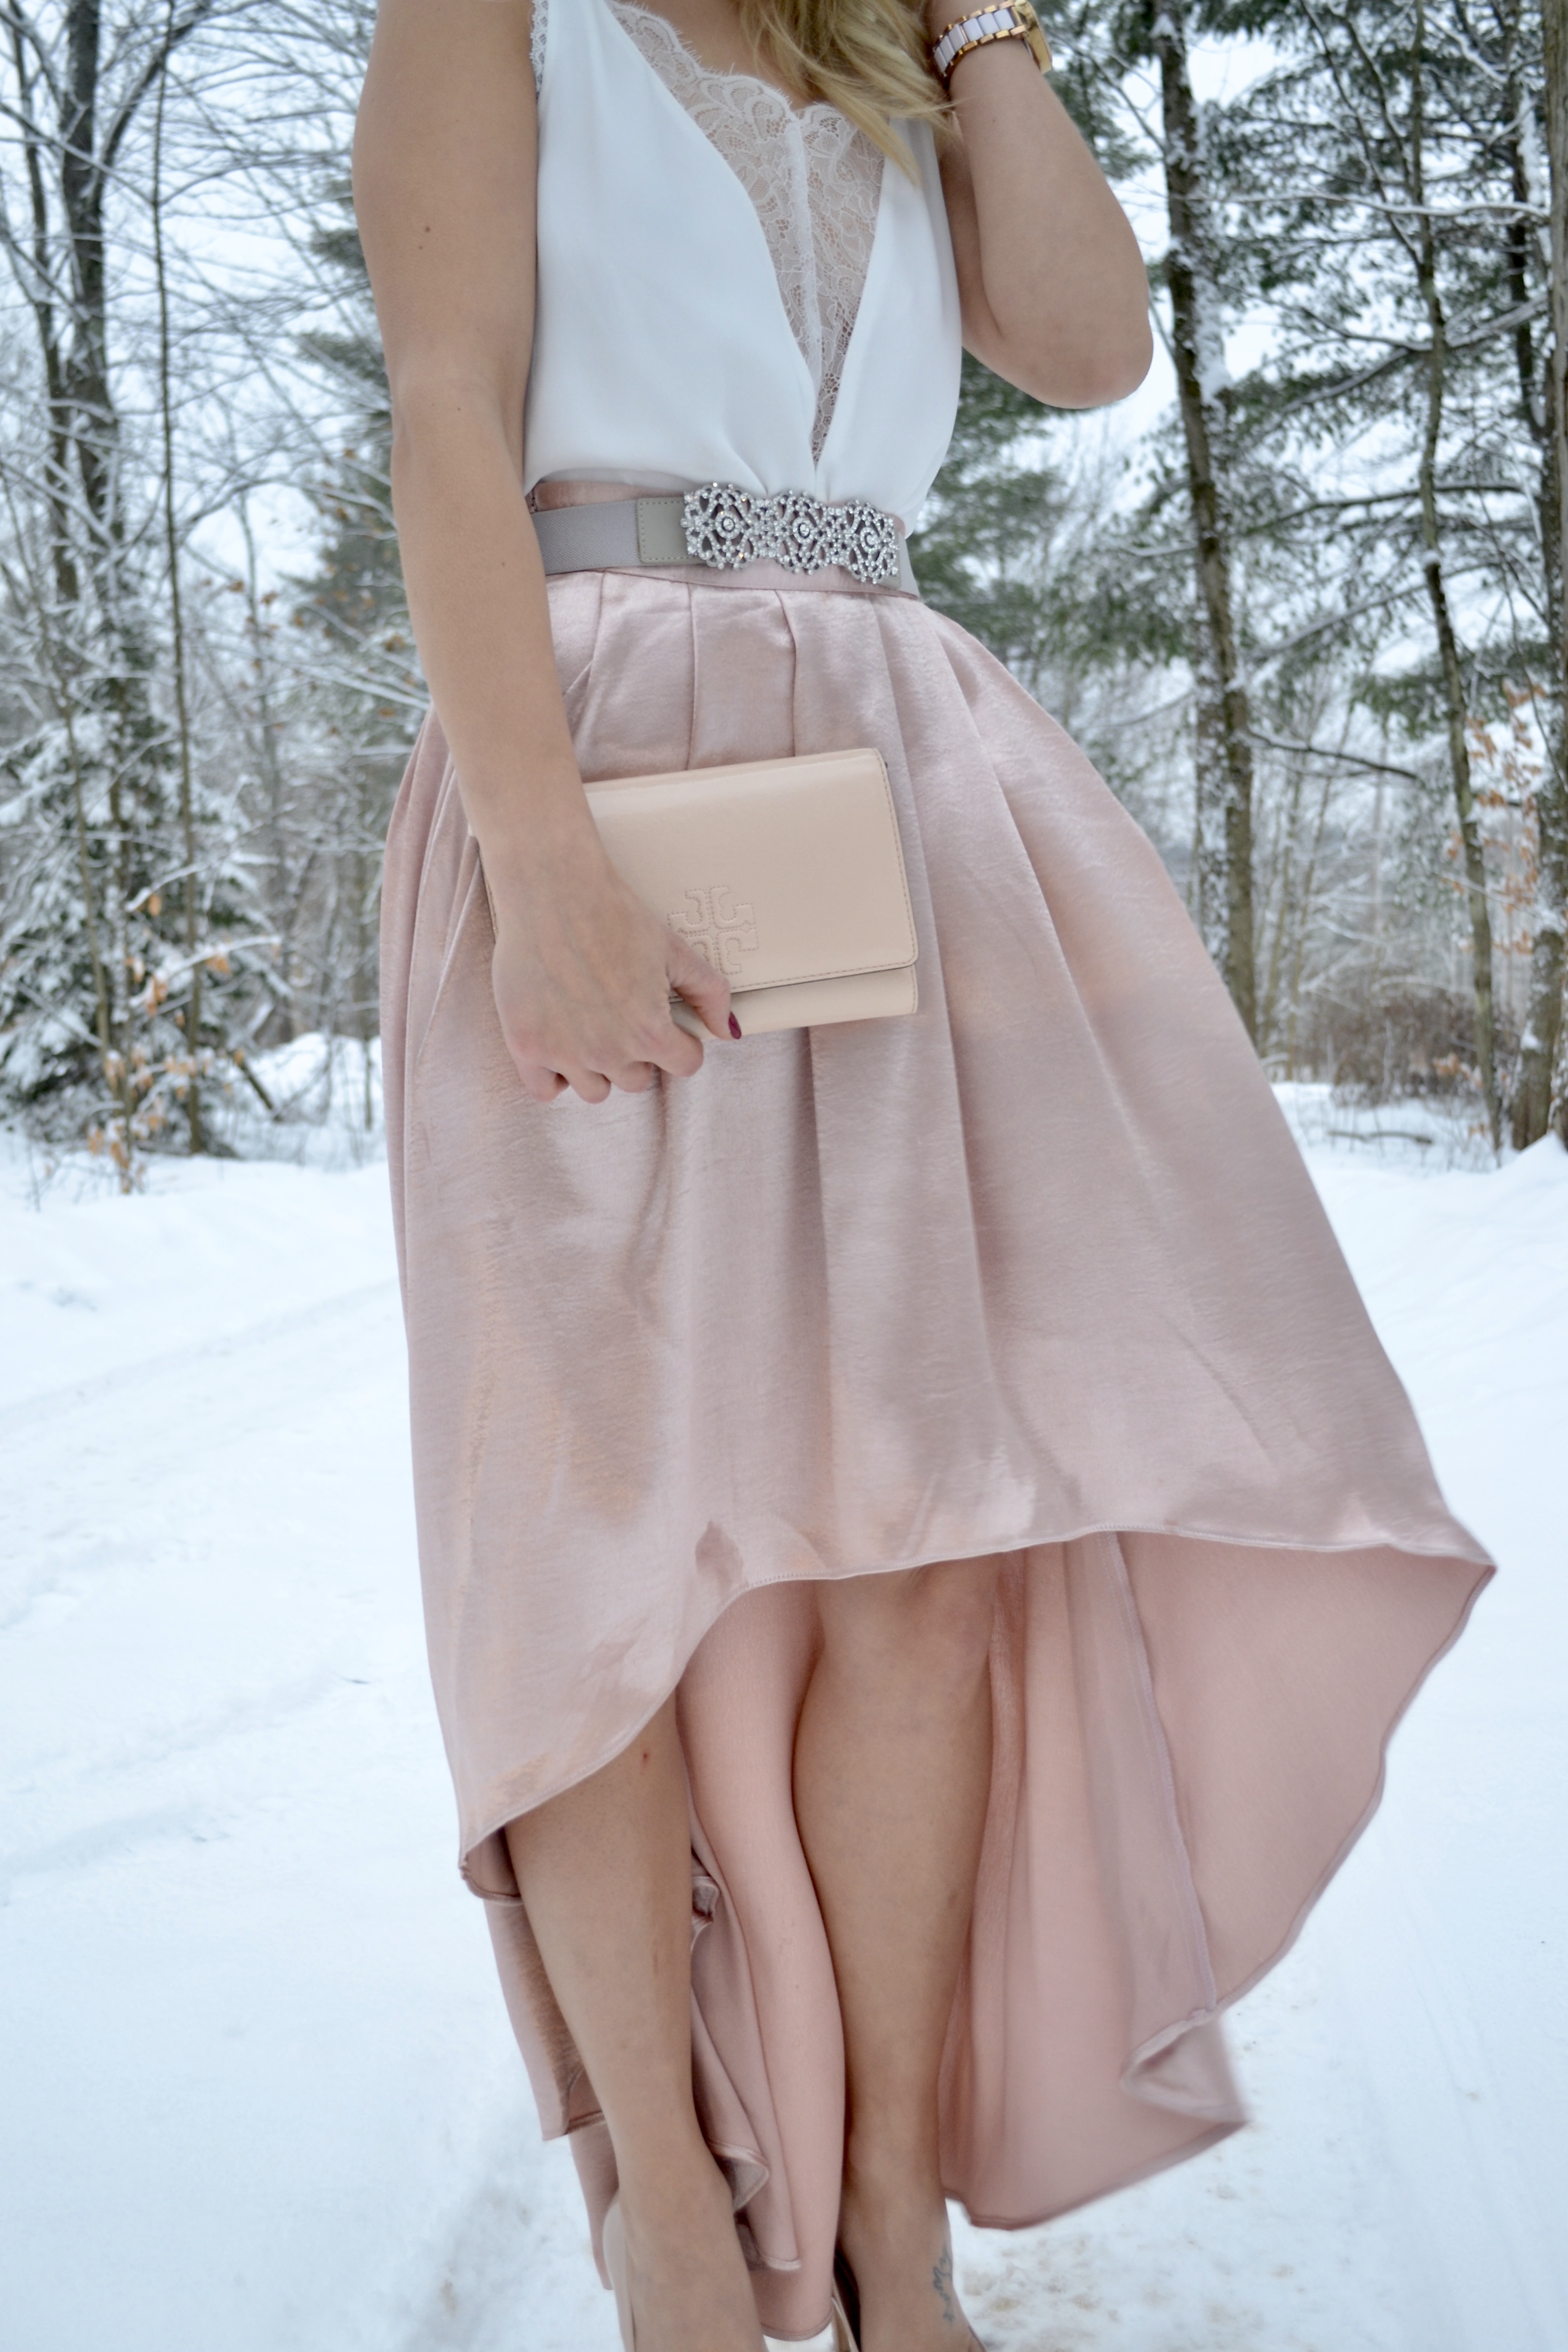 What to Wear This Christmas |metallic skirt, came, and clutch, with glitter belt|